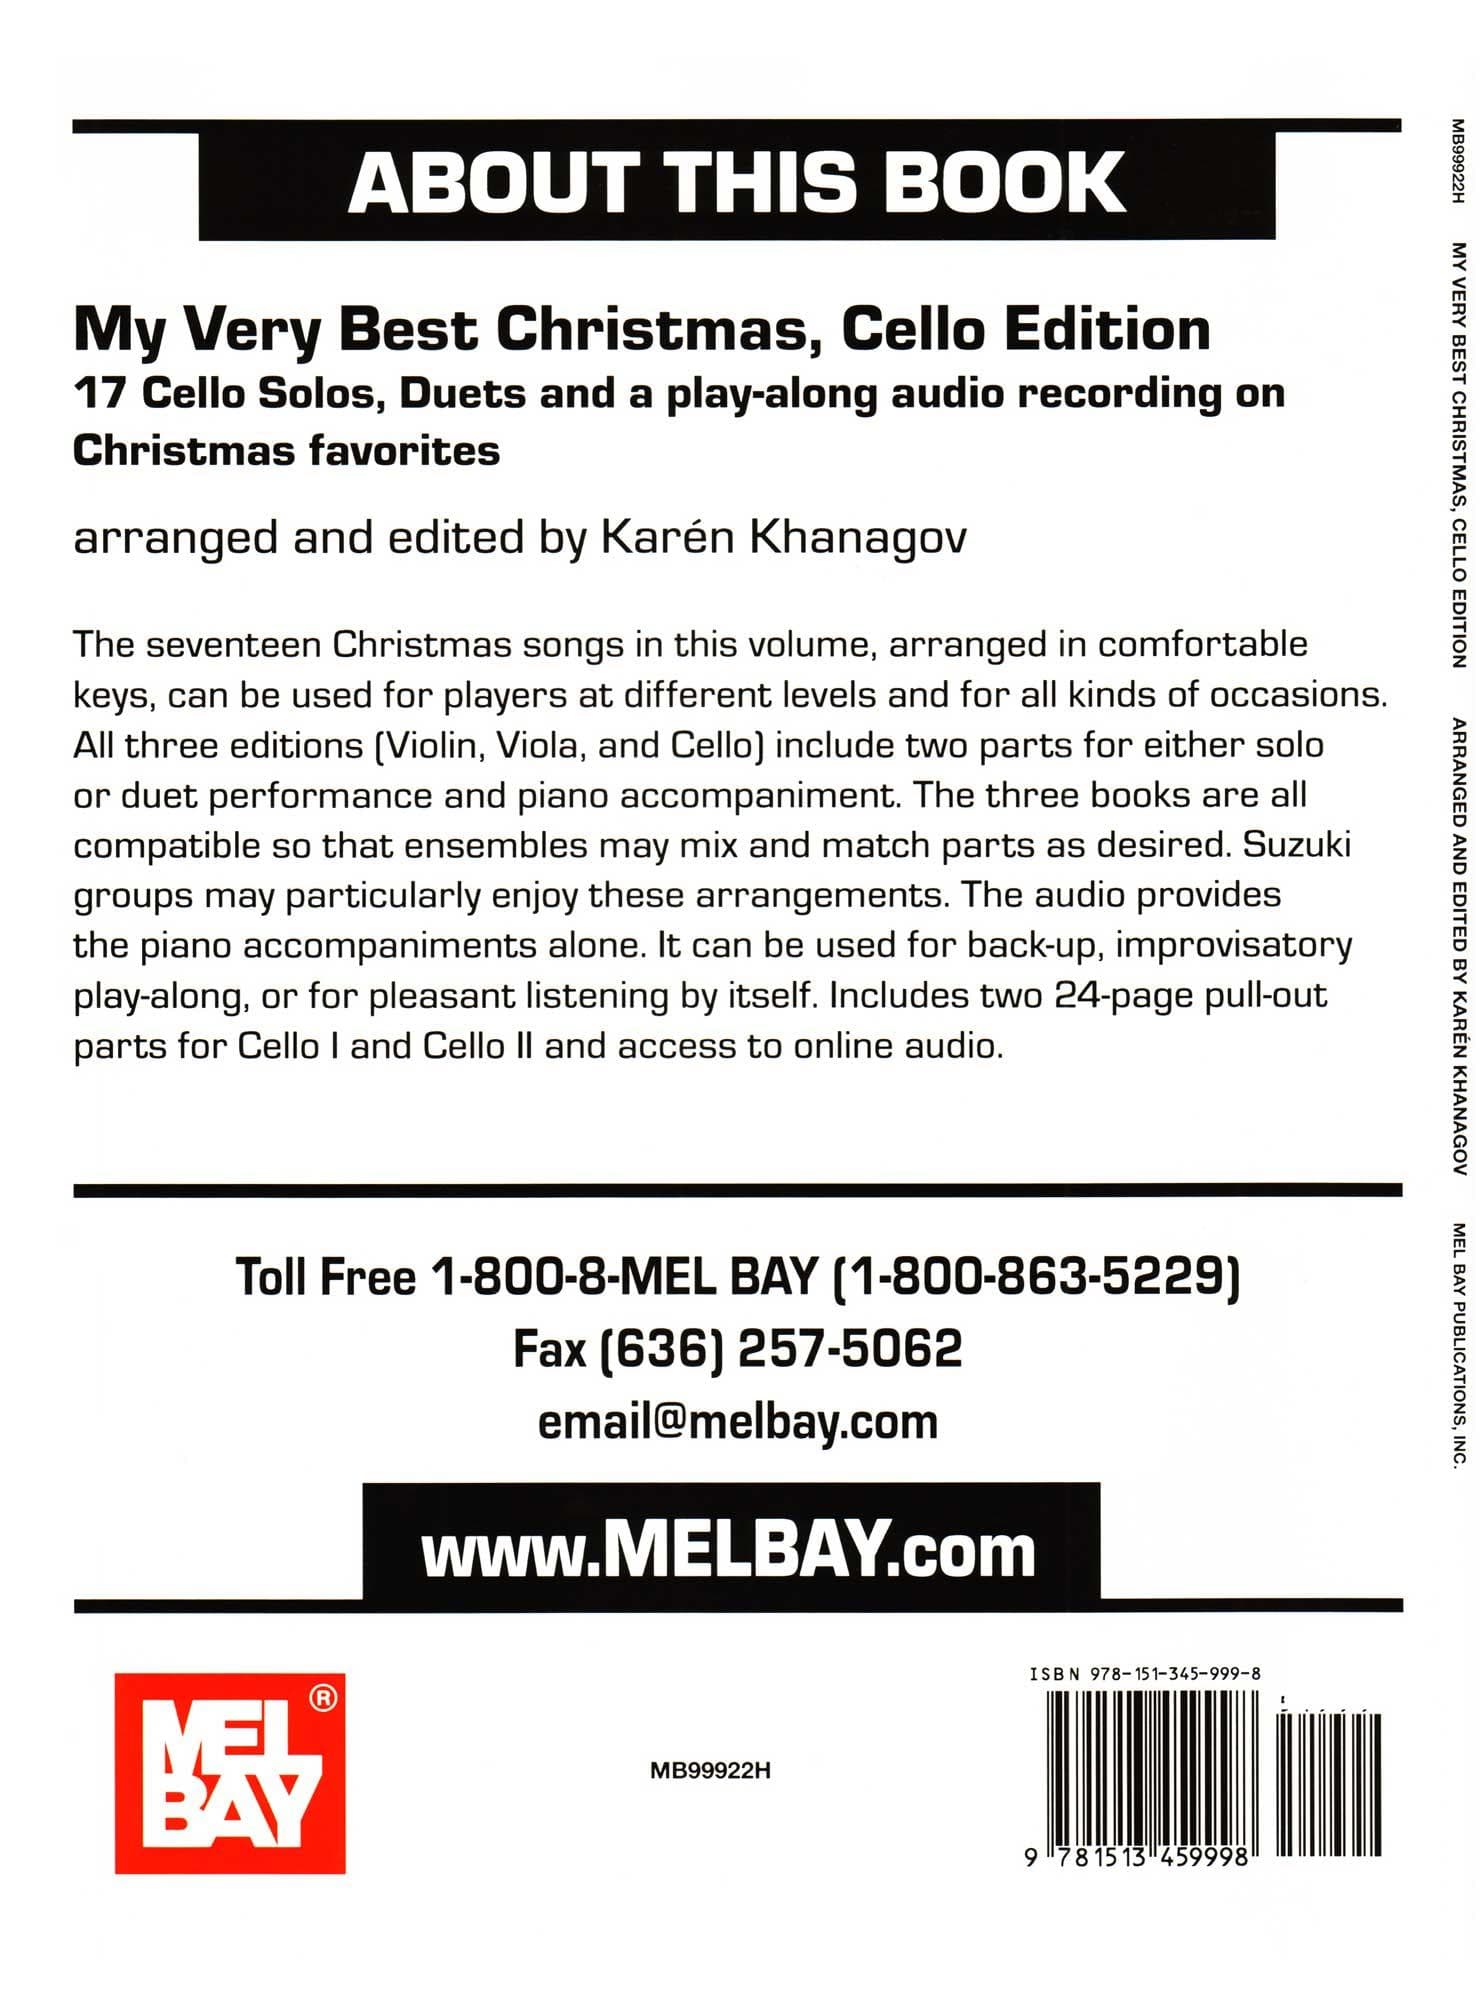 My Very Best Christmas - for One or Two Cellos and Piano - with Optional Online Audio - arranged by Karén Khanagov - Mel Bay Publications